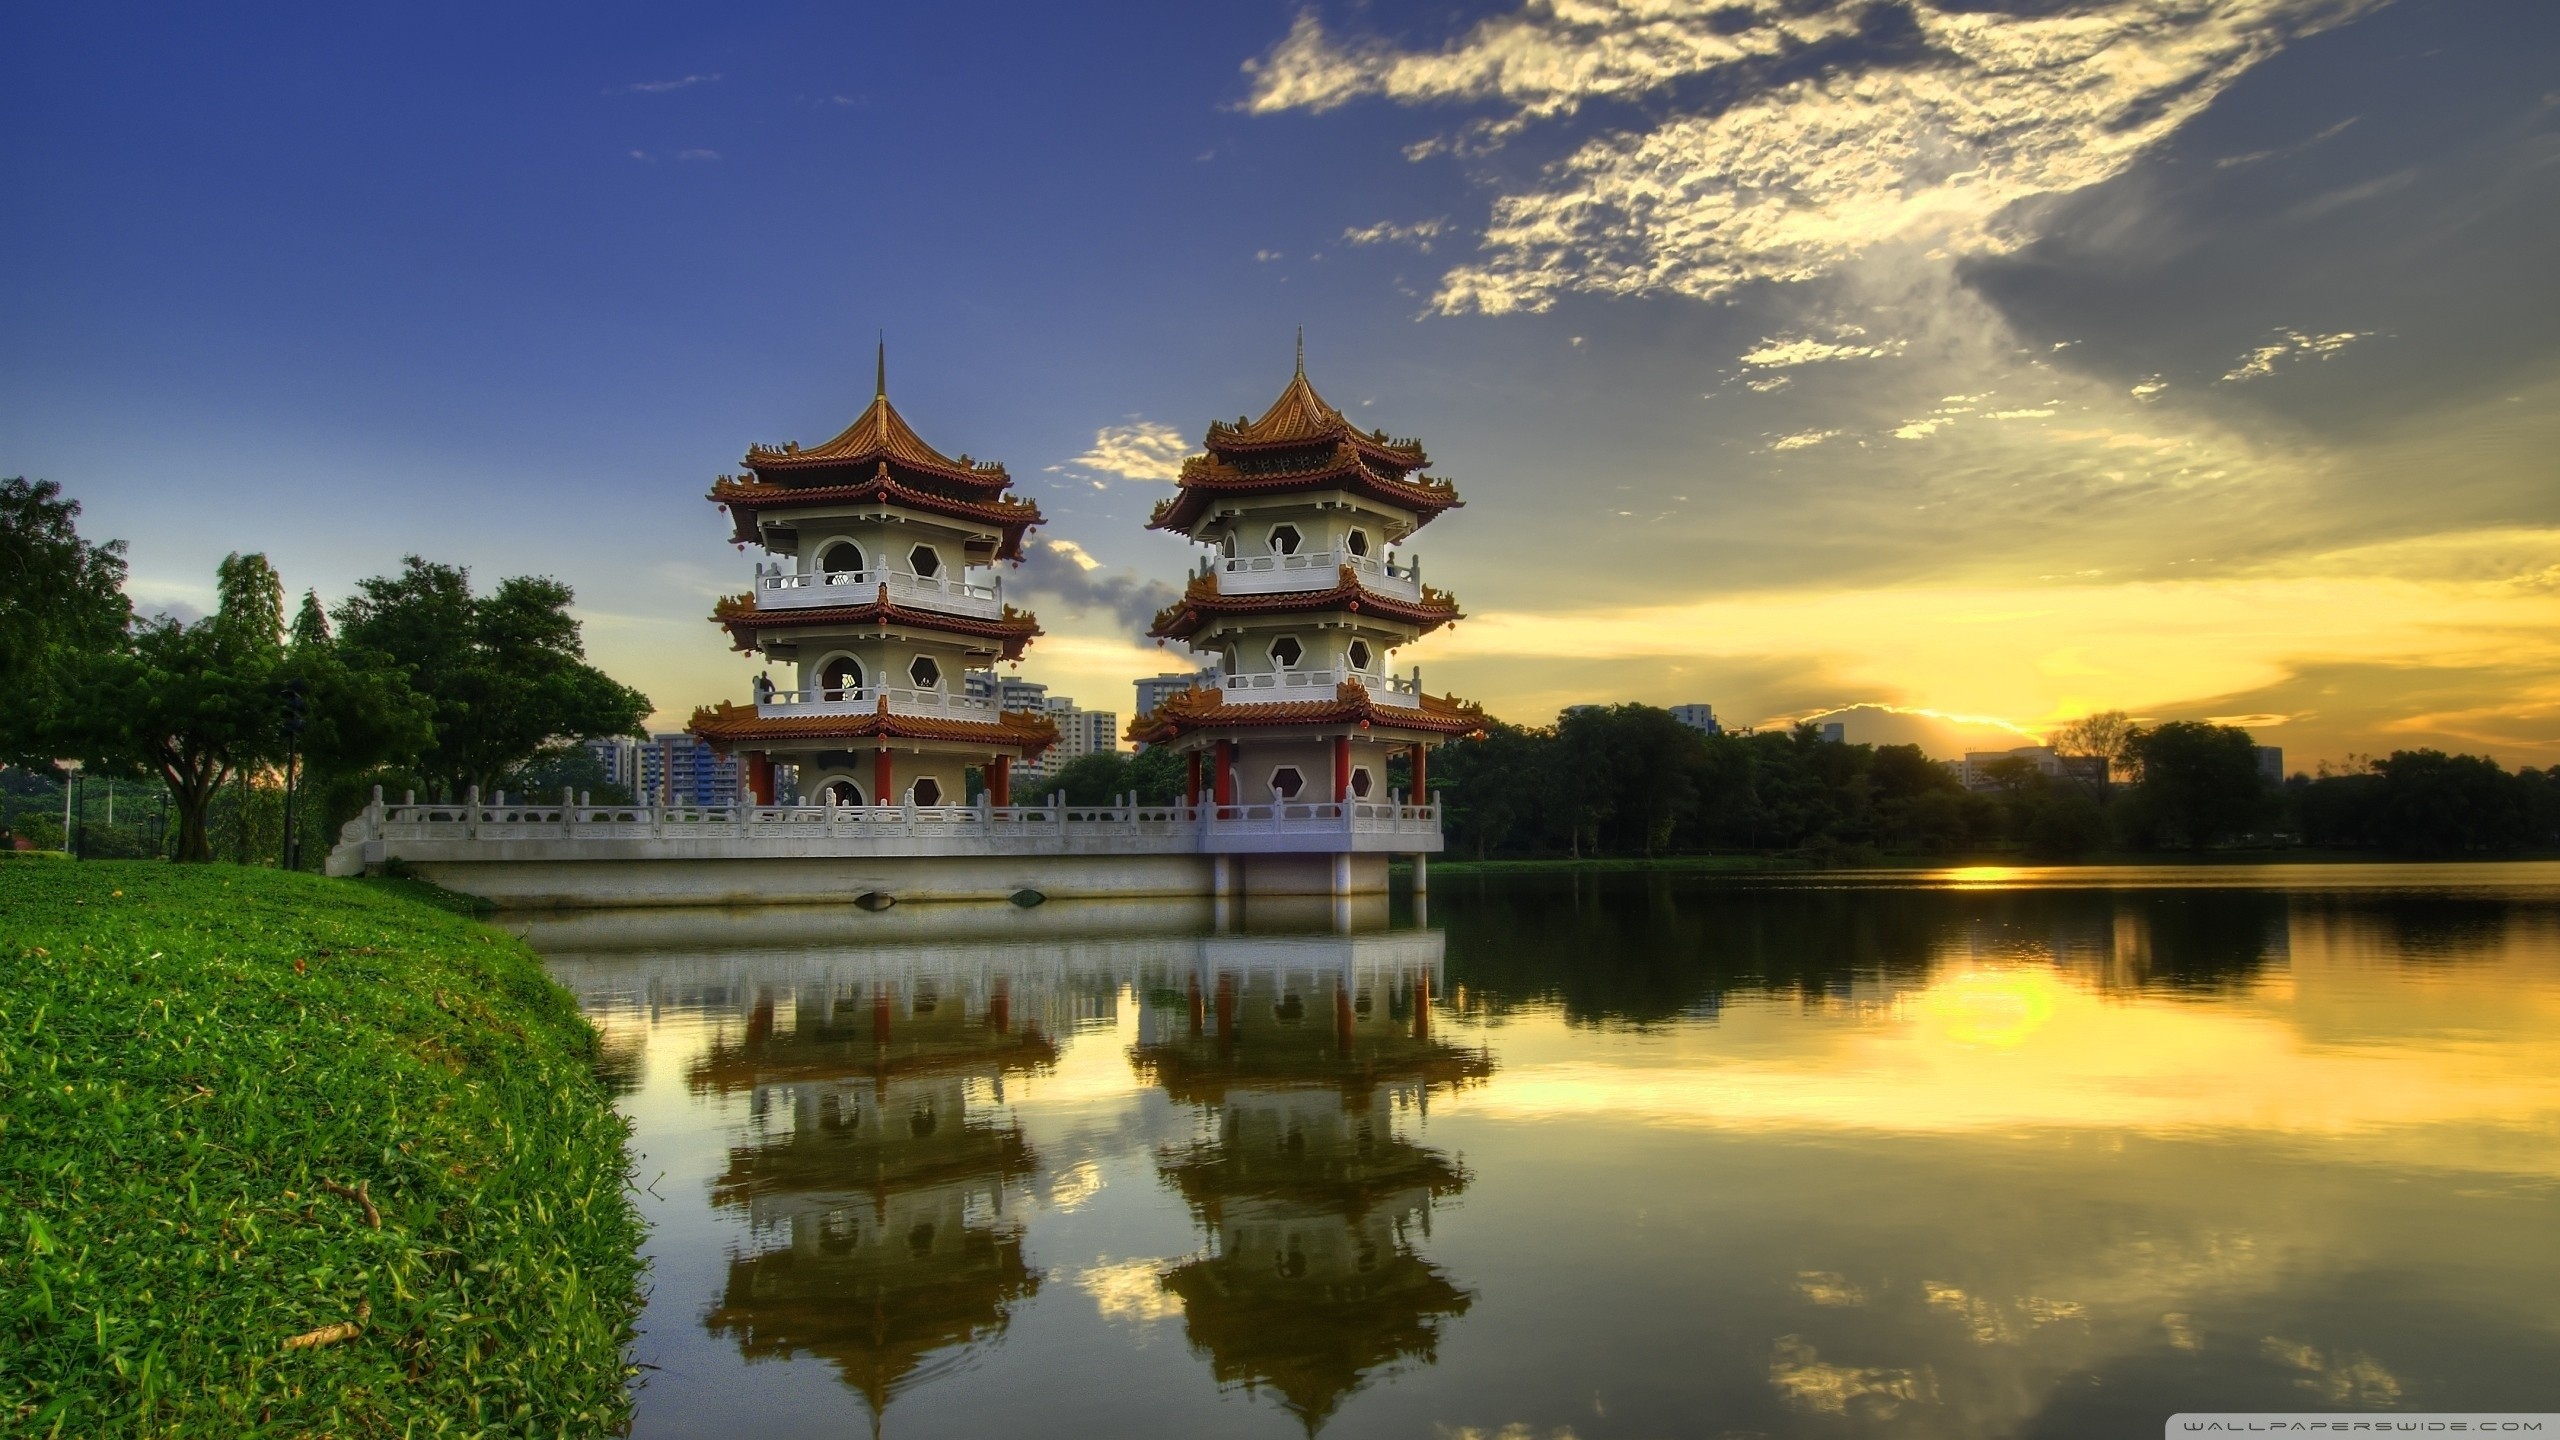 General 2560x1440 architecture trees Asian architecture Singapore pagoda lake grass water reflection clouds Sun